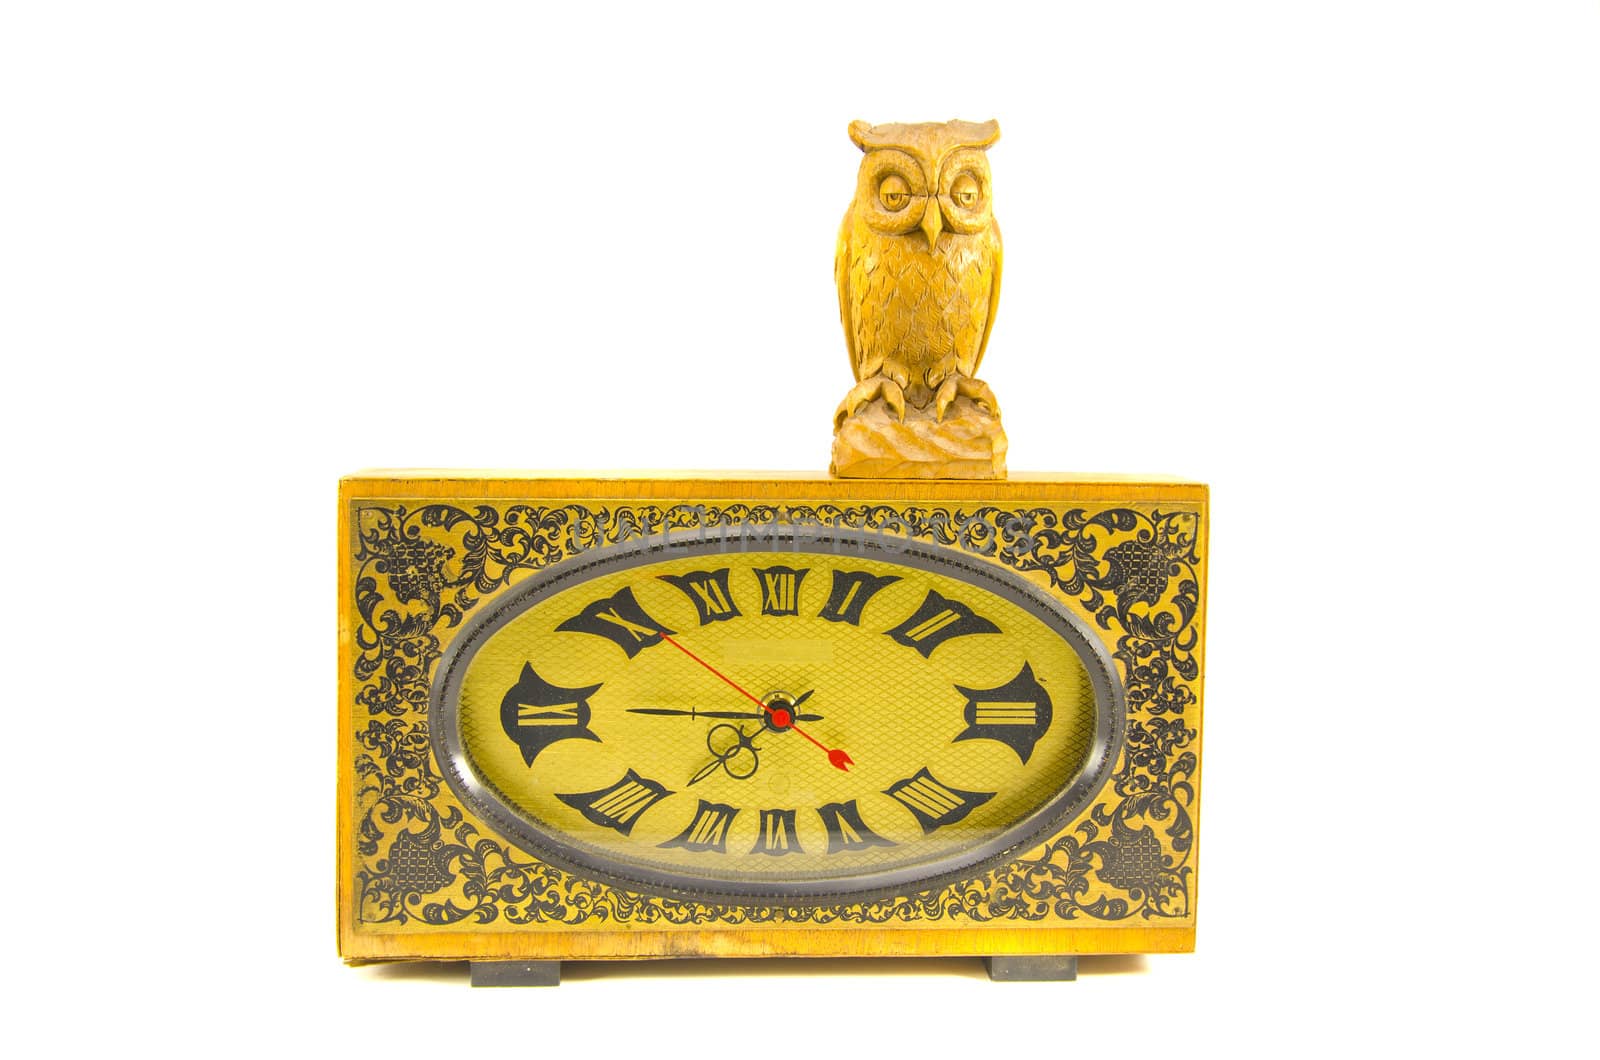 vintage clock and wooden owl sculpture isolated on white background